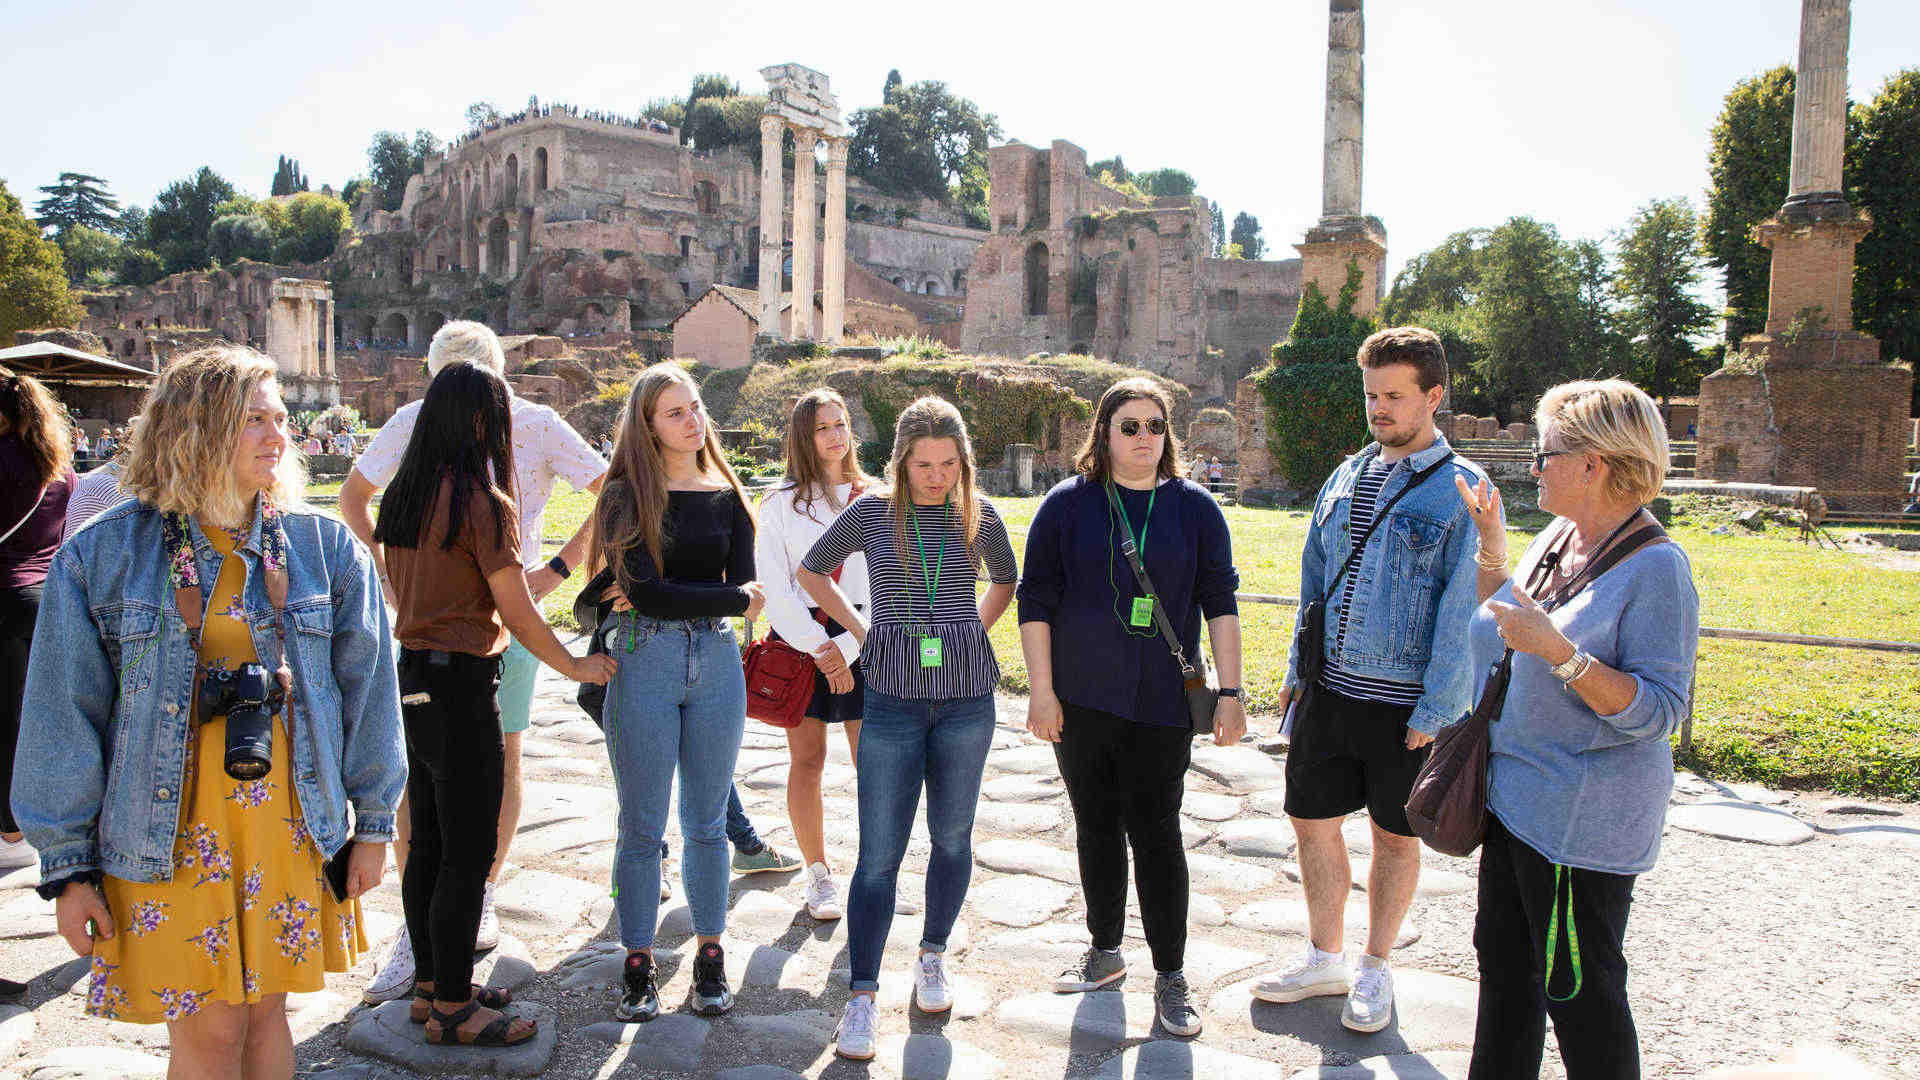 Students outside in Roman ruins